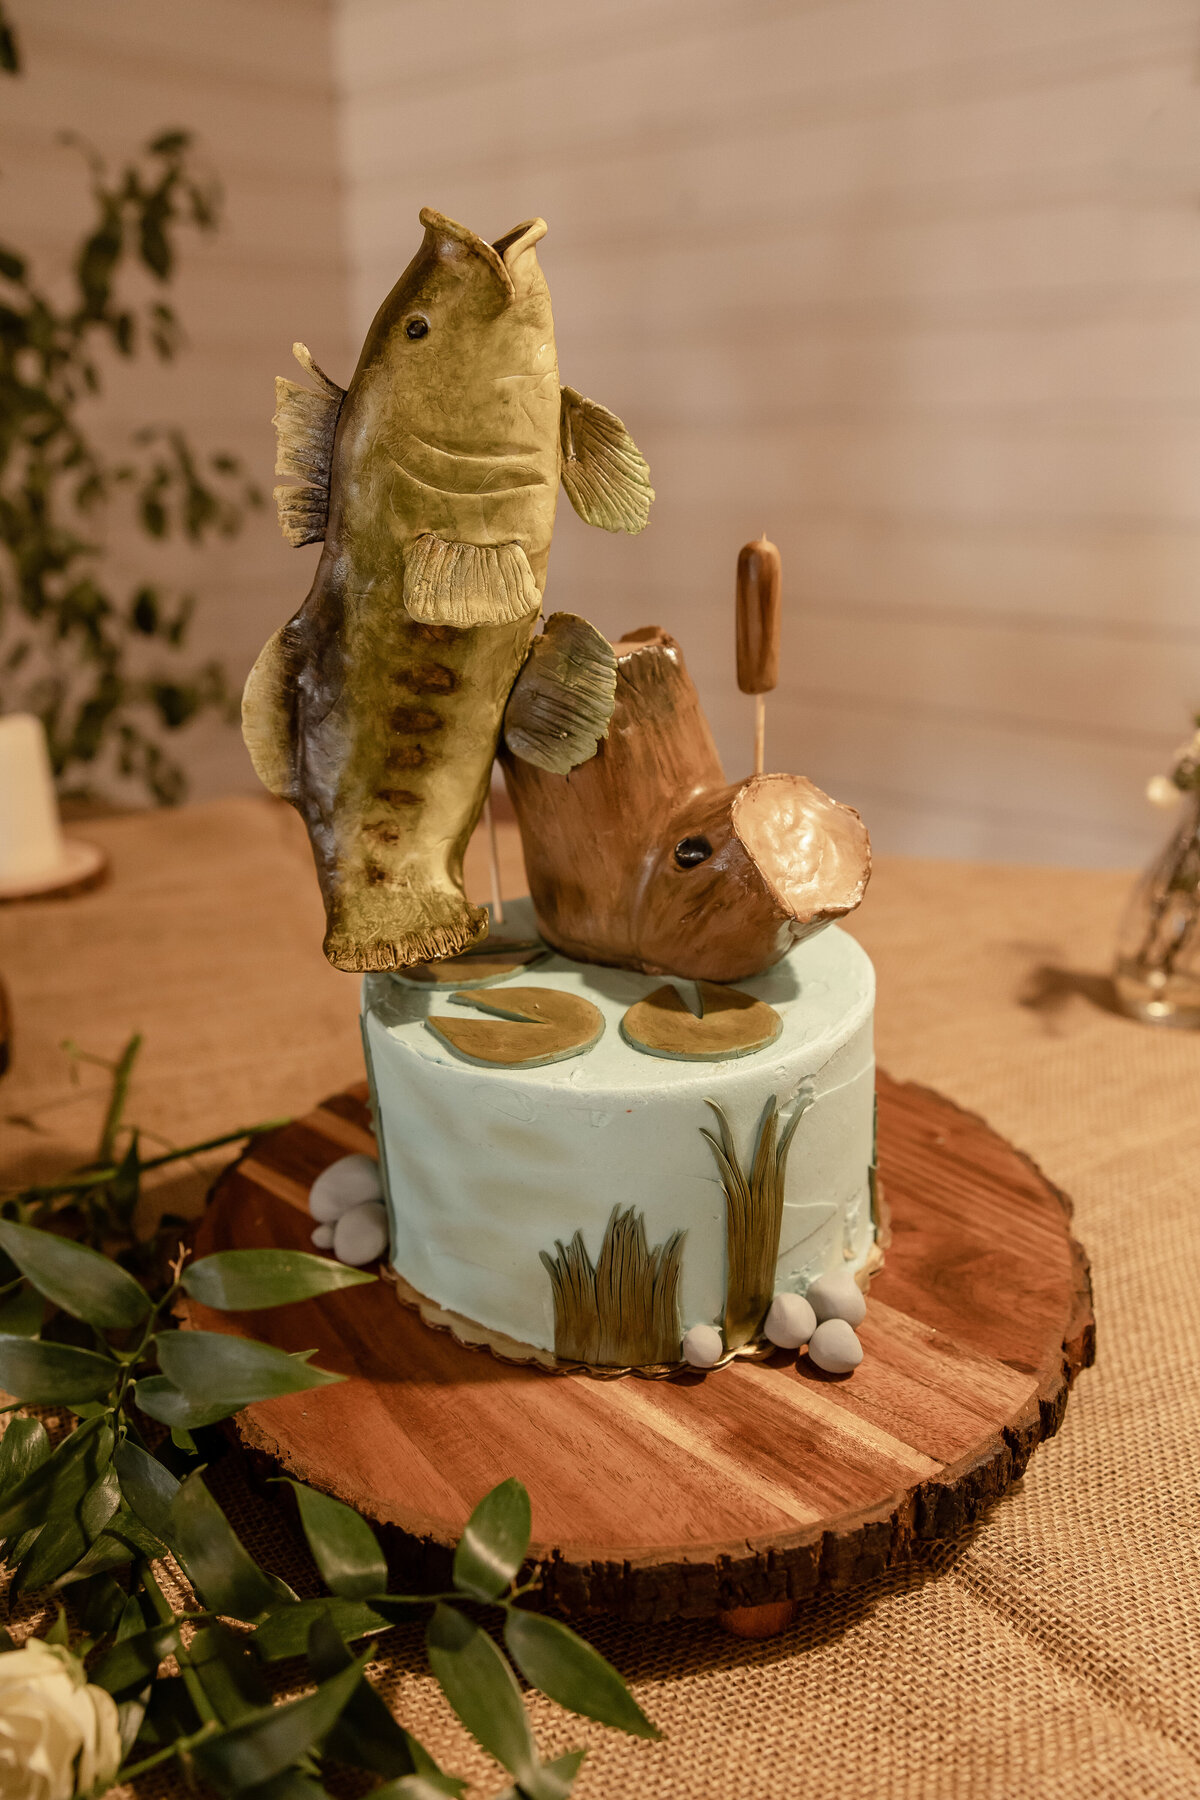 fish jumping out of water groom's cake at Texas wedding by Firefly Photography